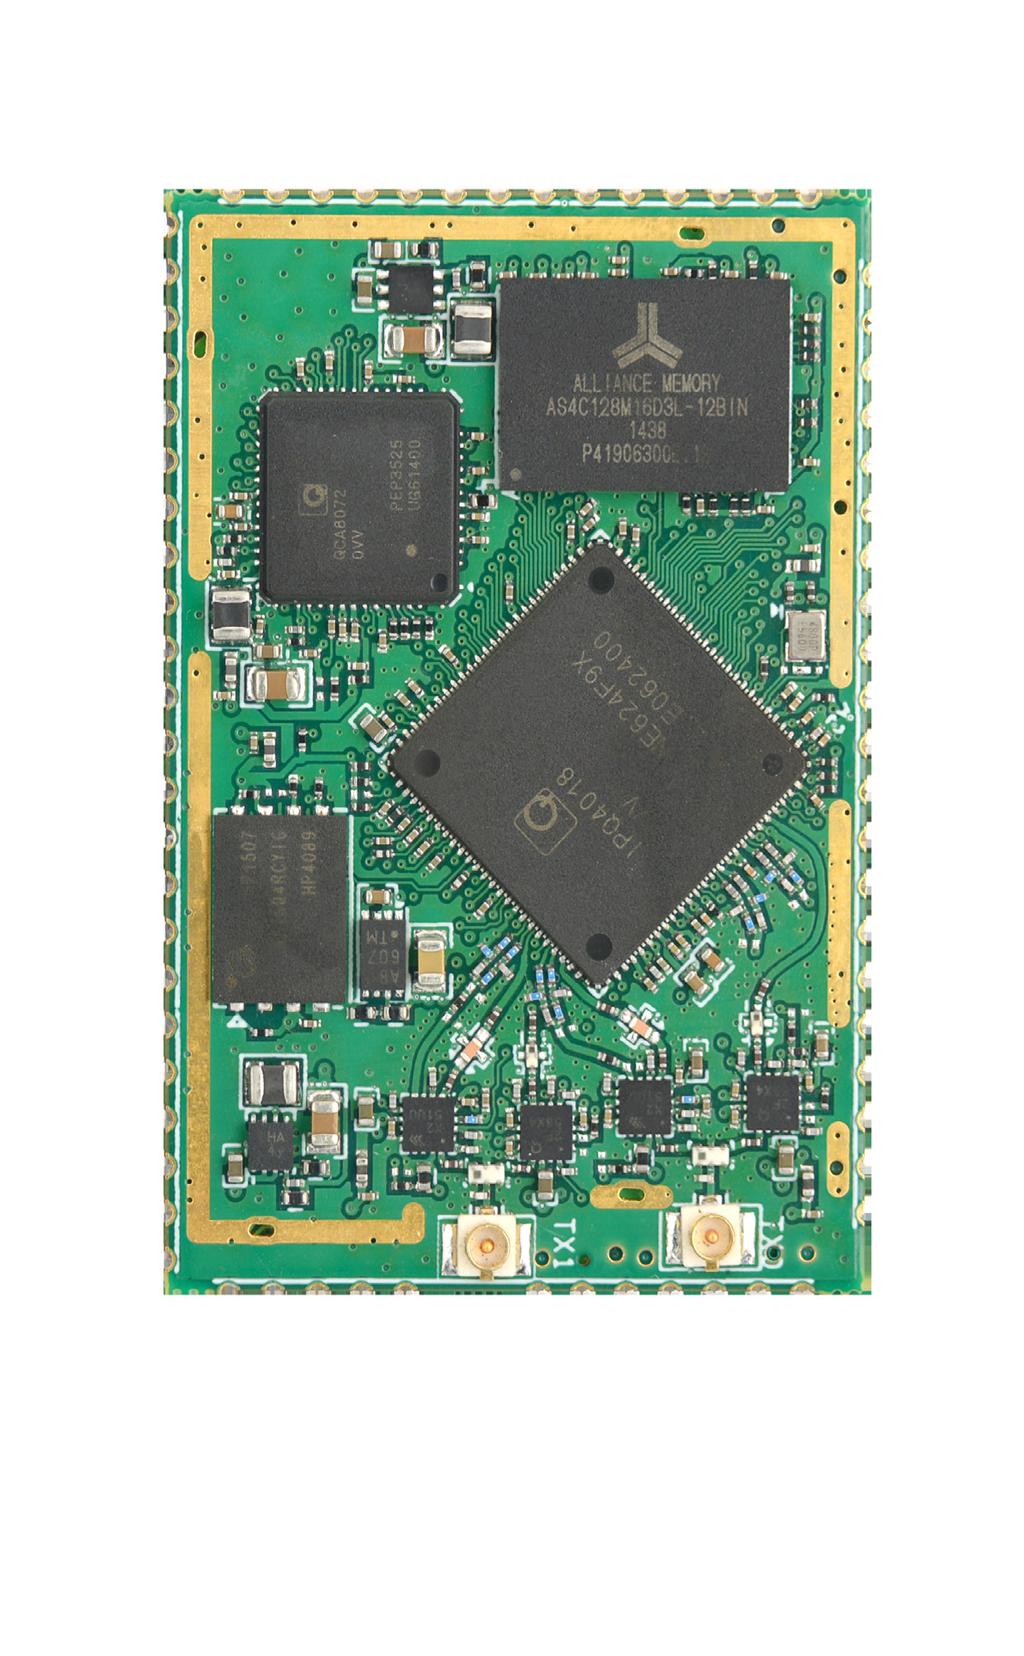 Data sheet is a very powerful quad-core CPU based module with dual band concurrent radio supporting 802.